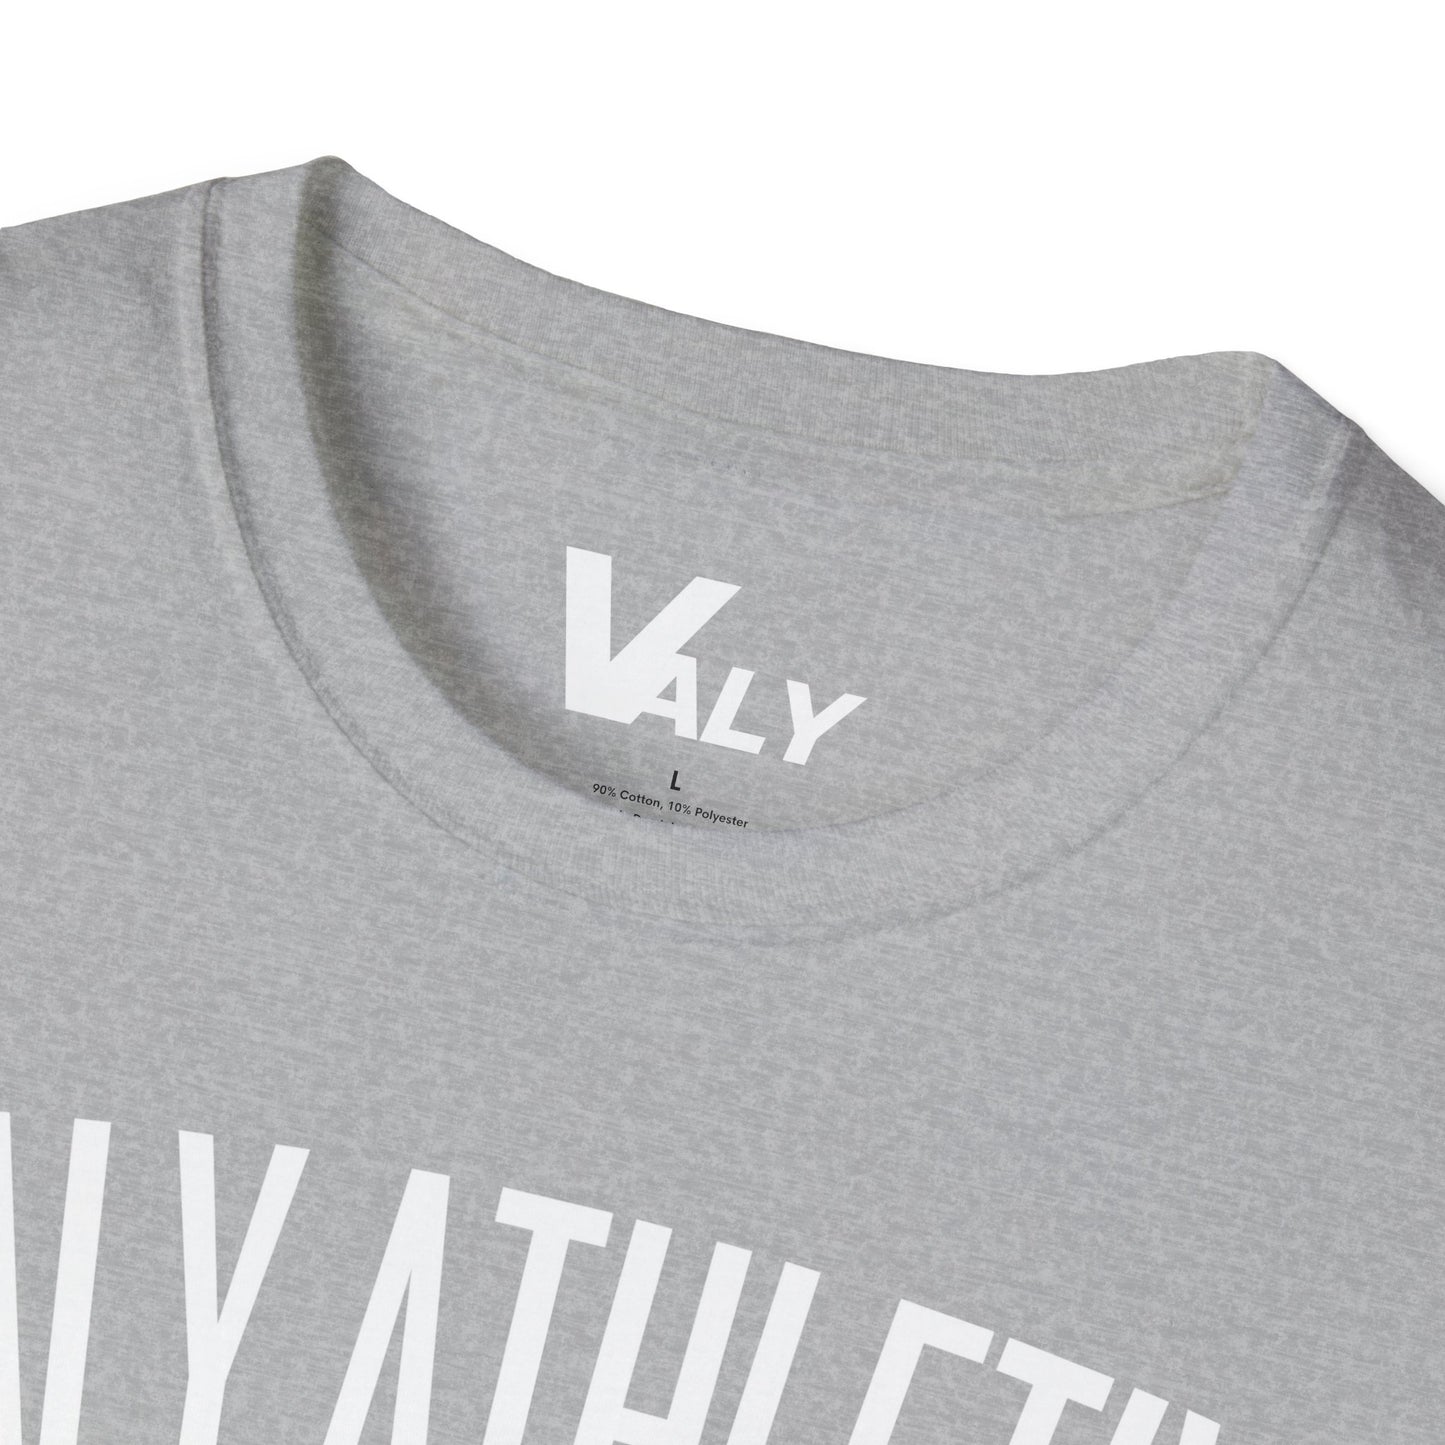 VALY Curve T-Shirt - SPORT GREY